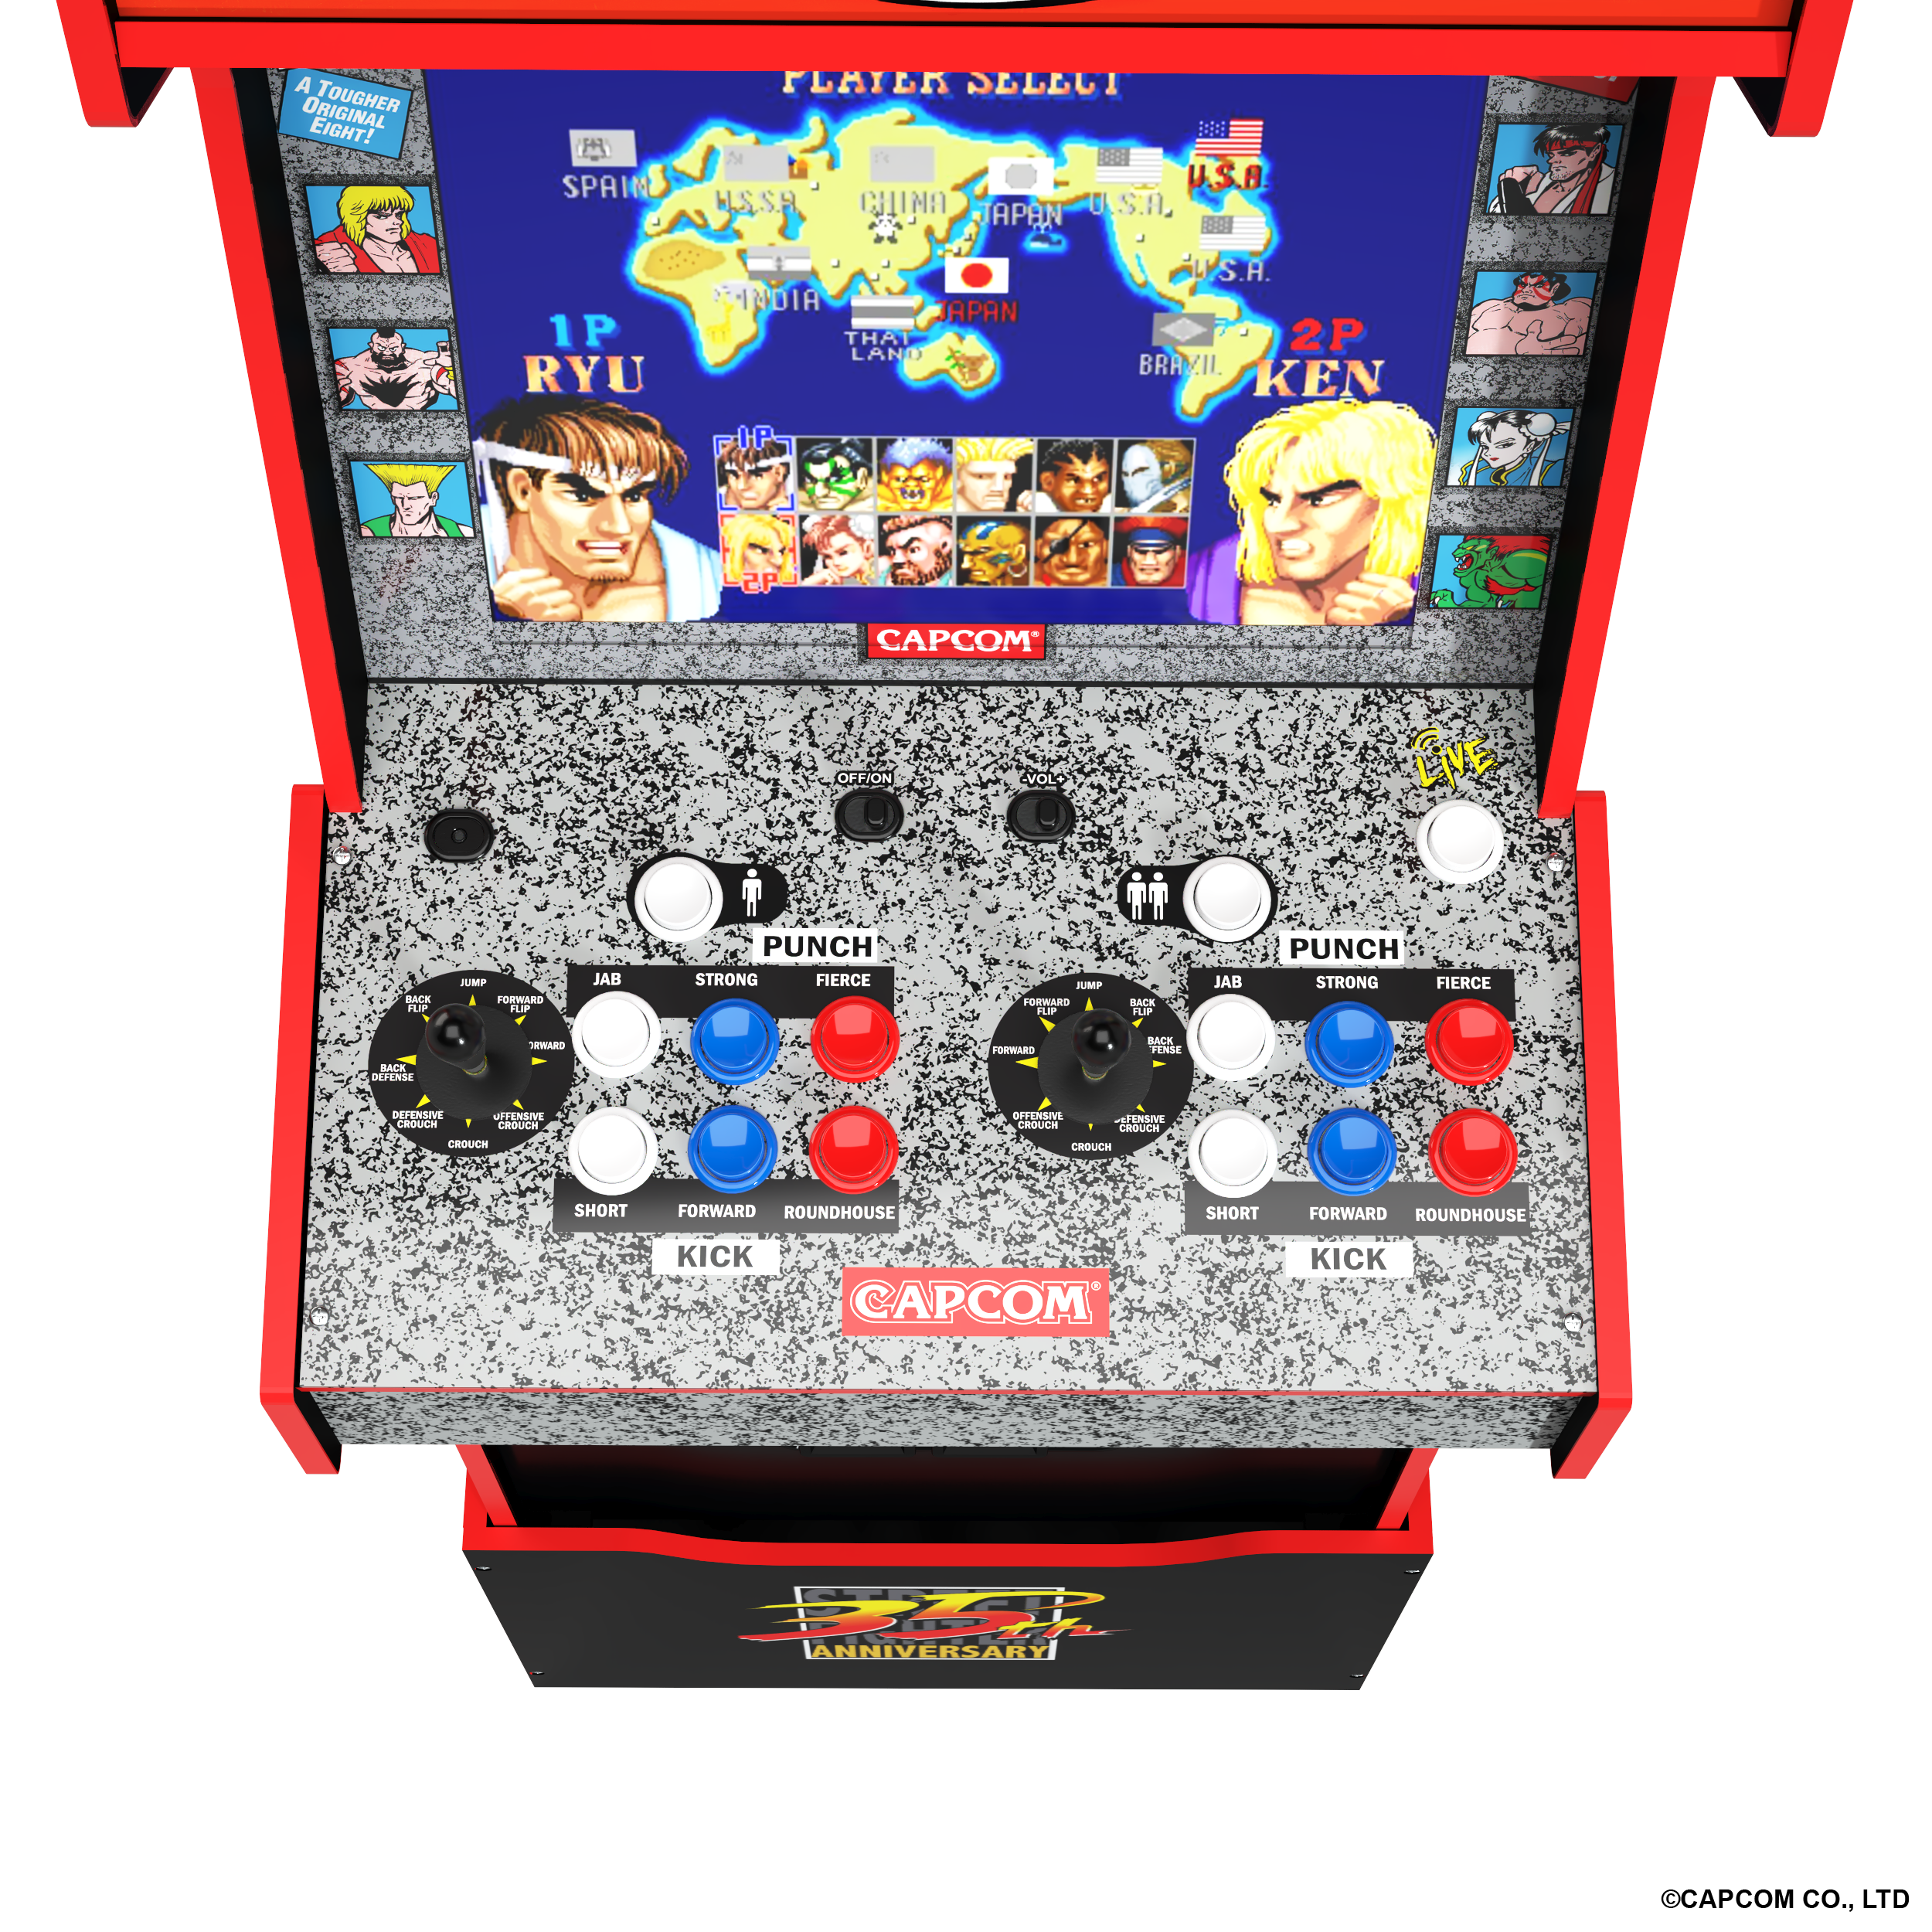 Wifi Street 14in1 Legacy Fighter 1UP ARCADE